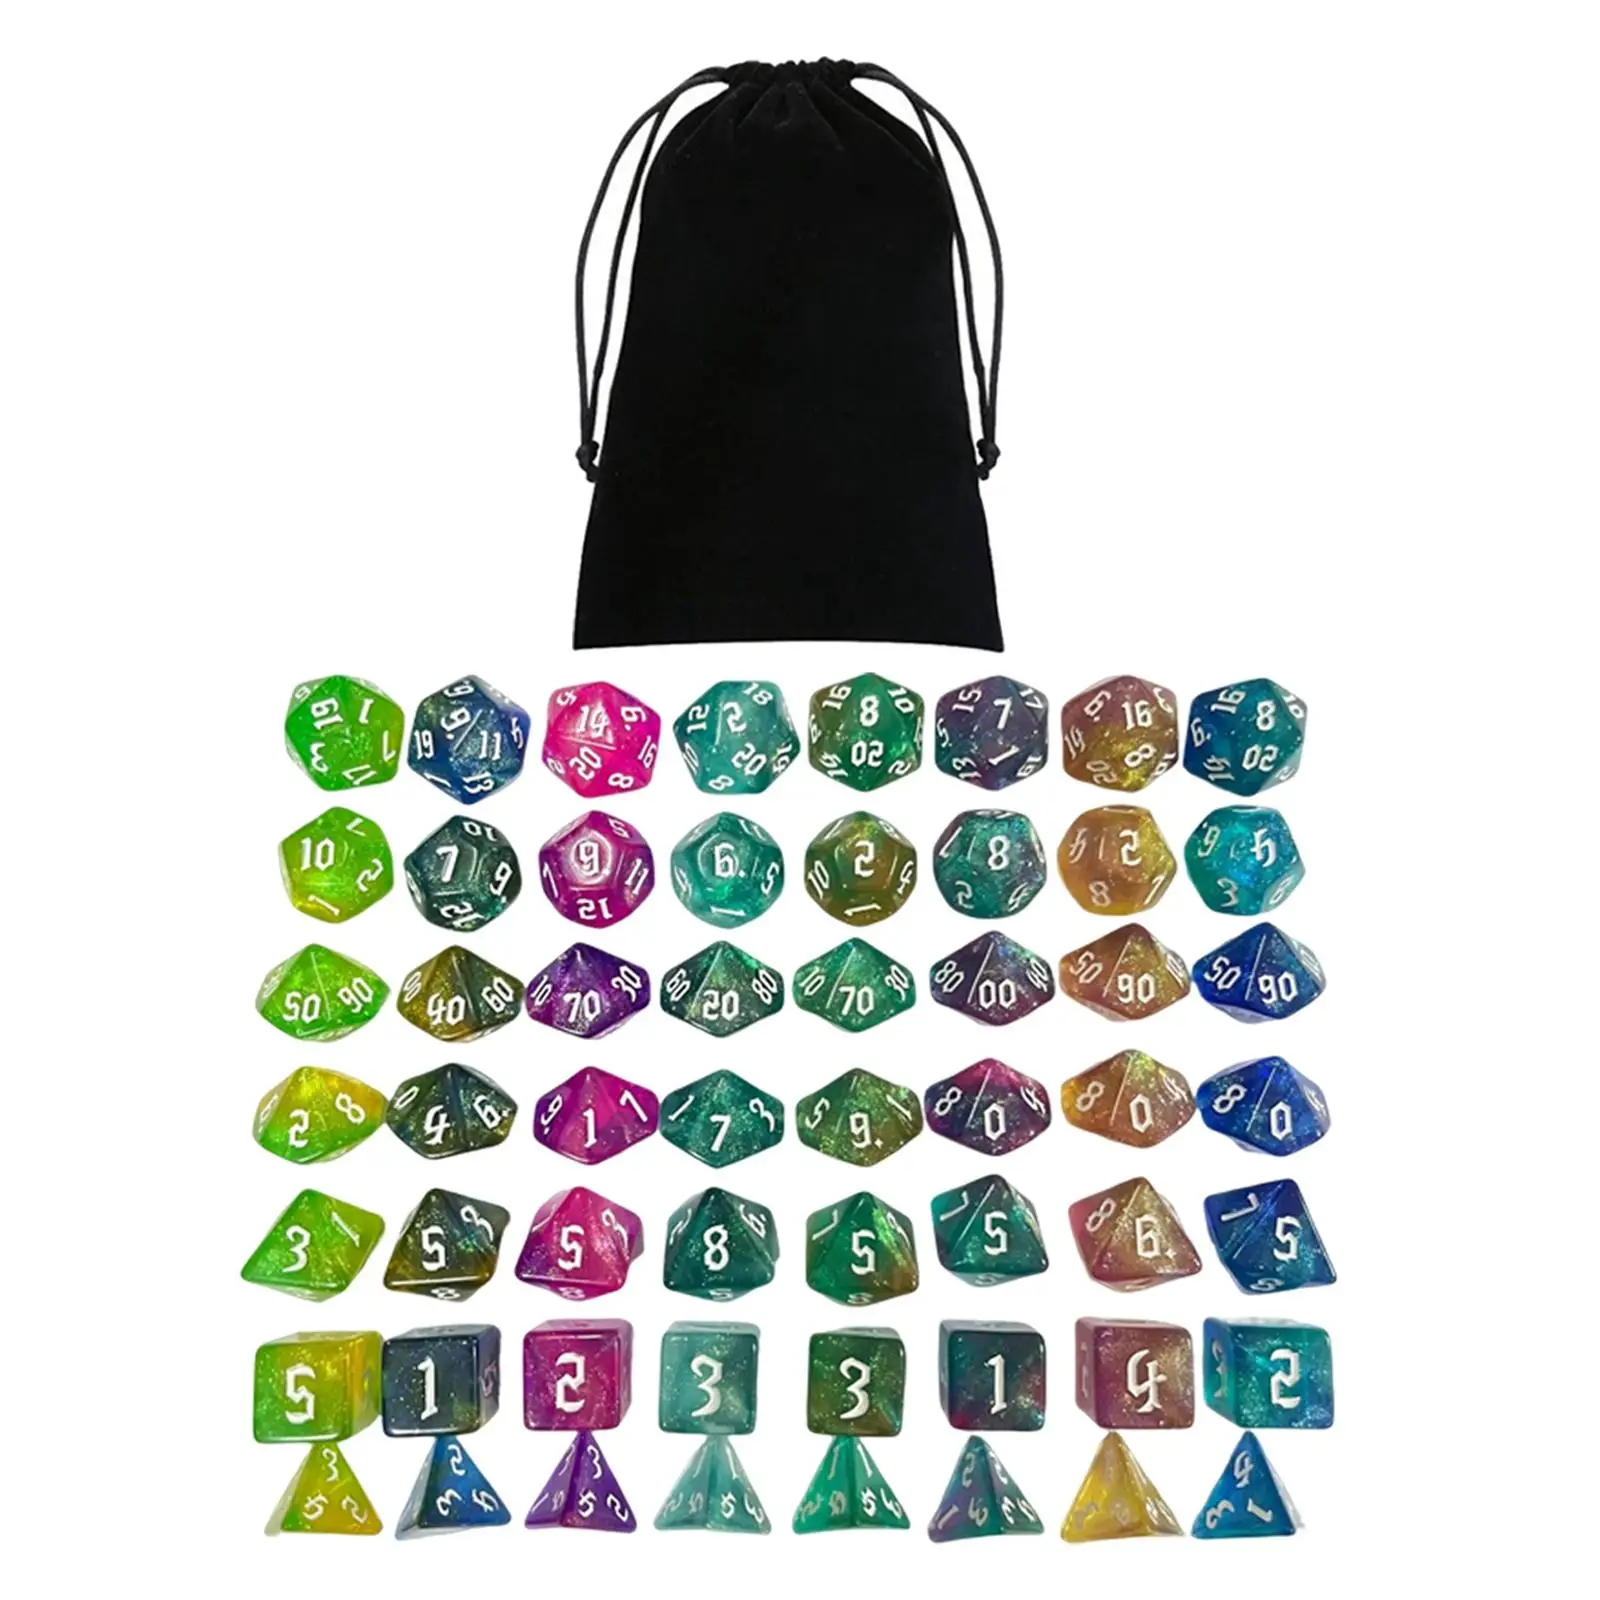 56 Pieces Polyhedral Dices Set Toys Bicolor for Board Game Props Parties KTV